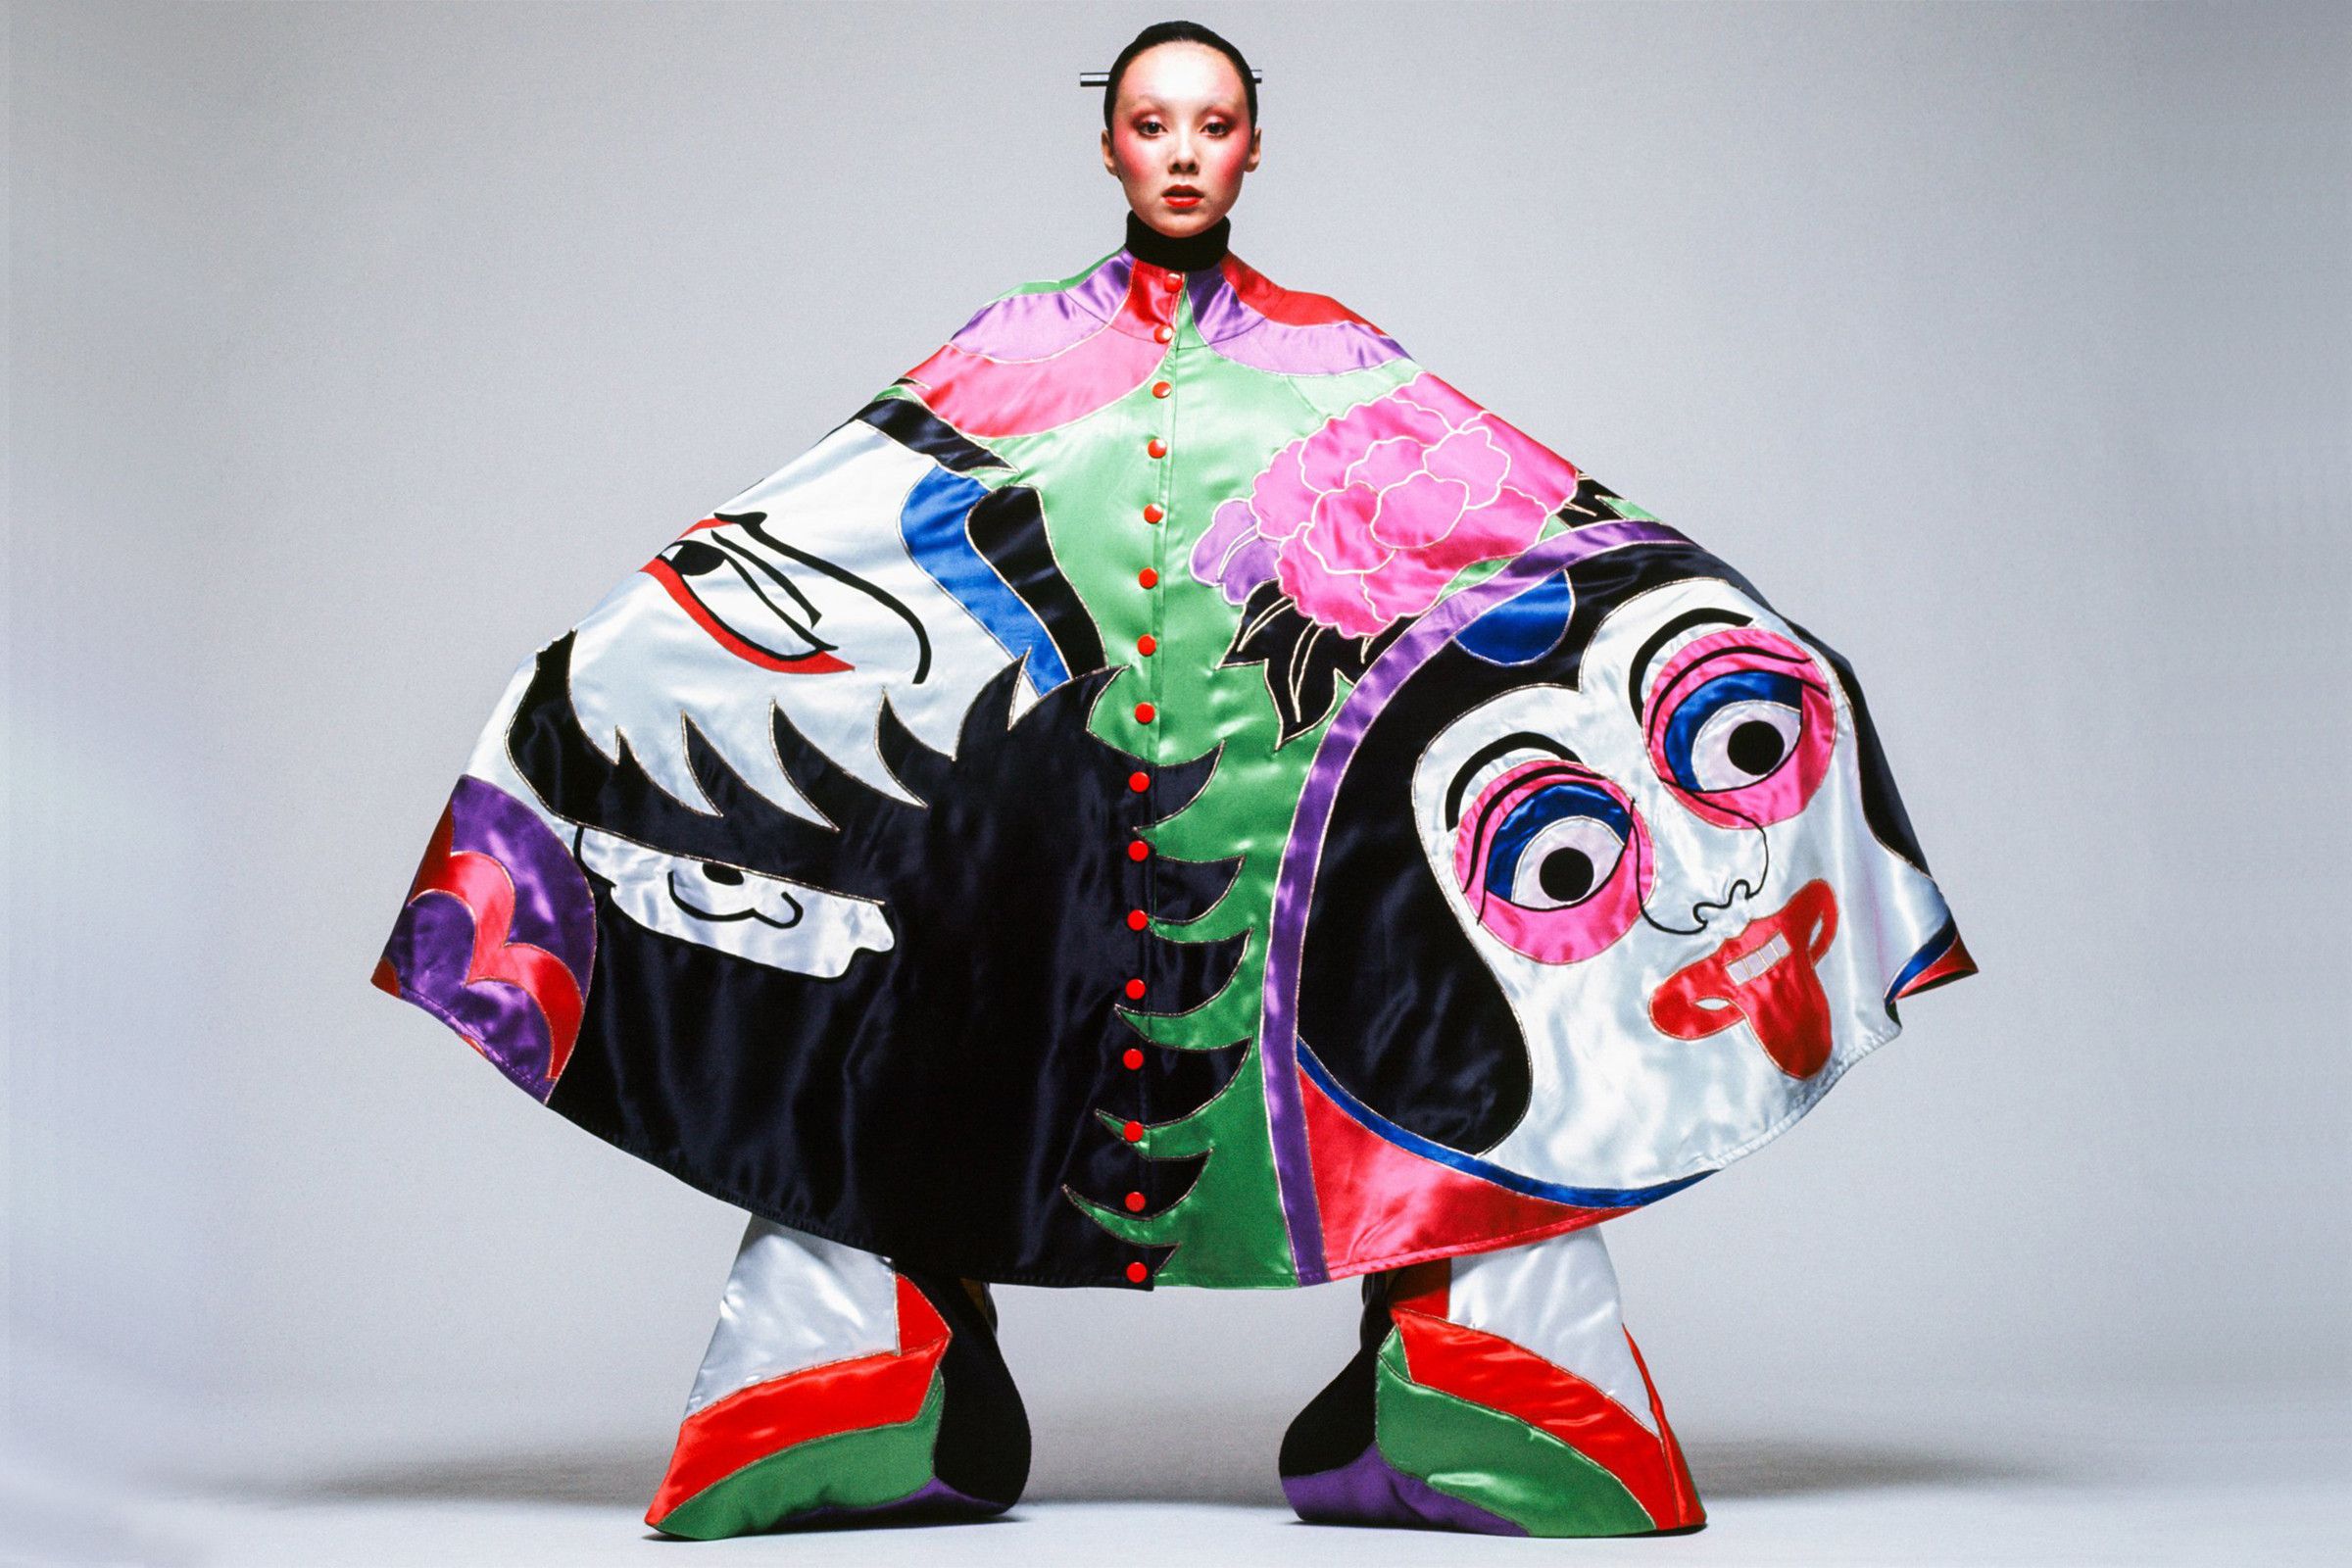 Kenzo's Kansai Yamamoto Collection Is An Homage To Two Japanese